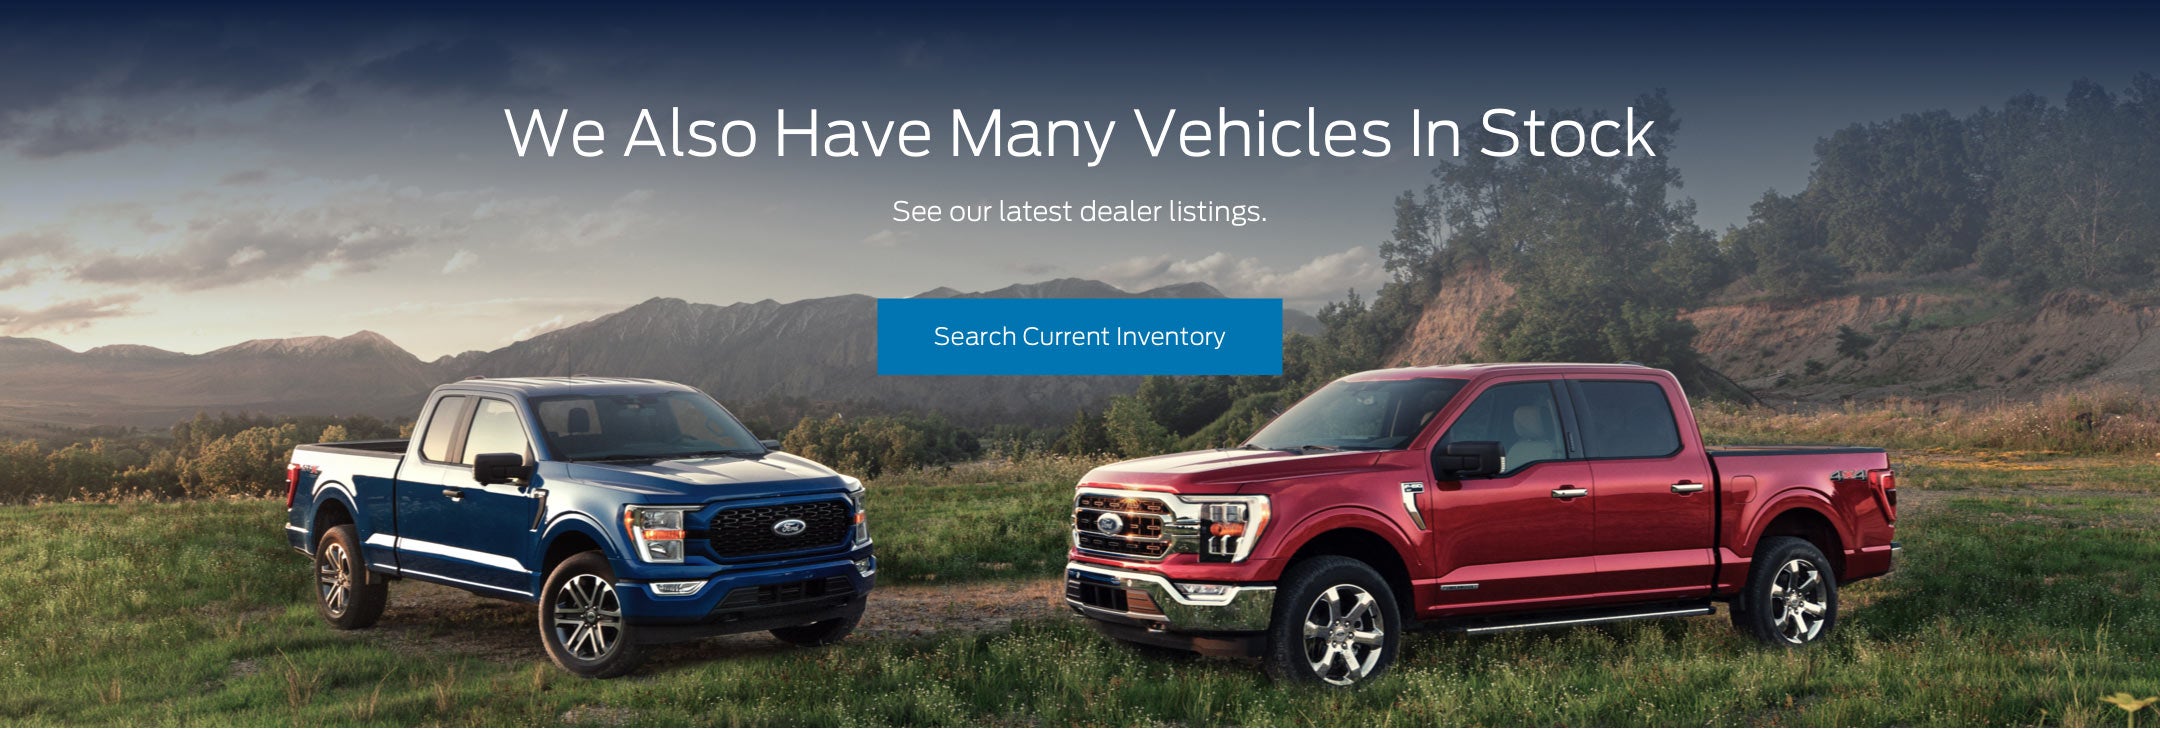 Ford vehicles in stock | Haselden Brothers Inc. in Hemingway SC